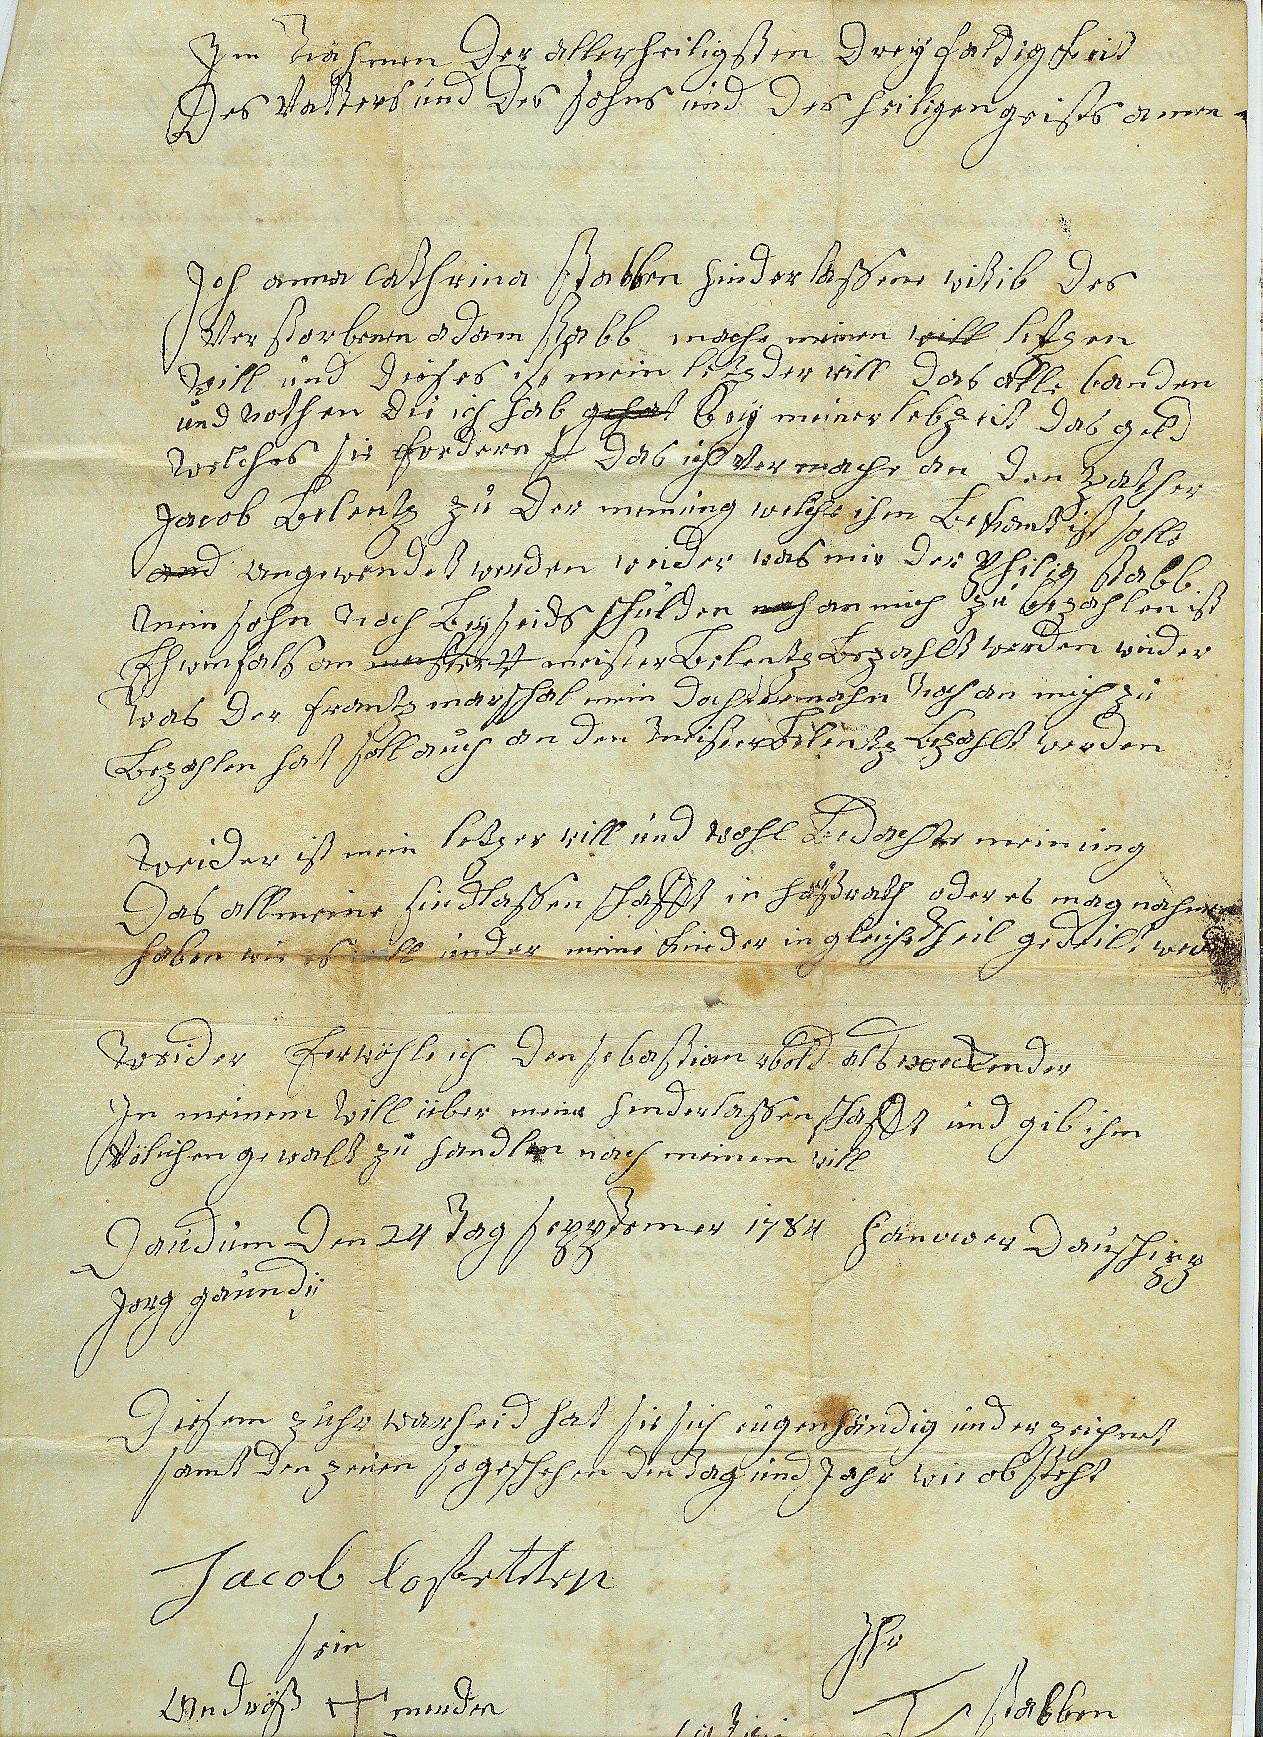 Staub Family Source Records and Other Research Notes